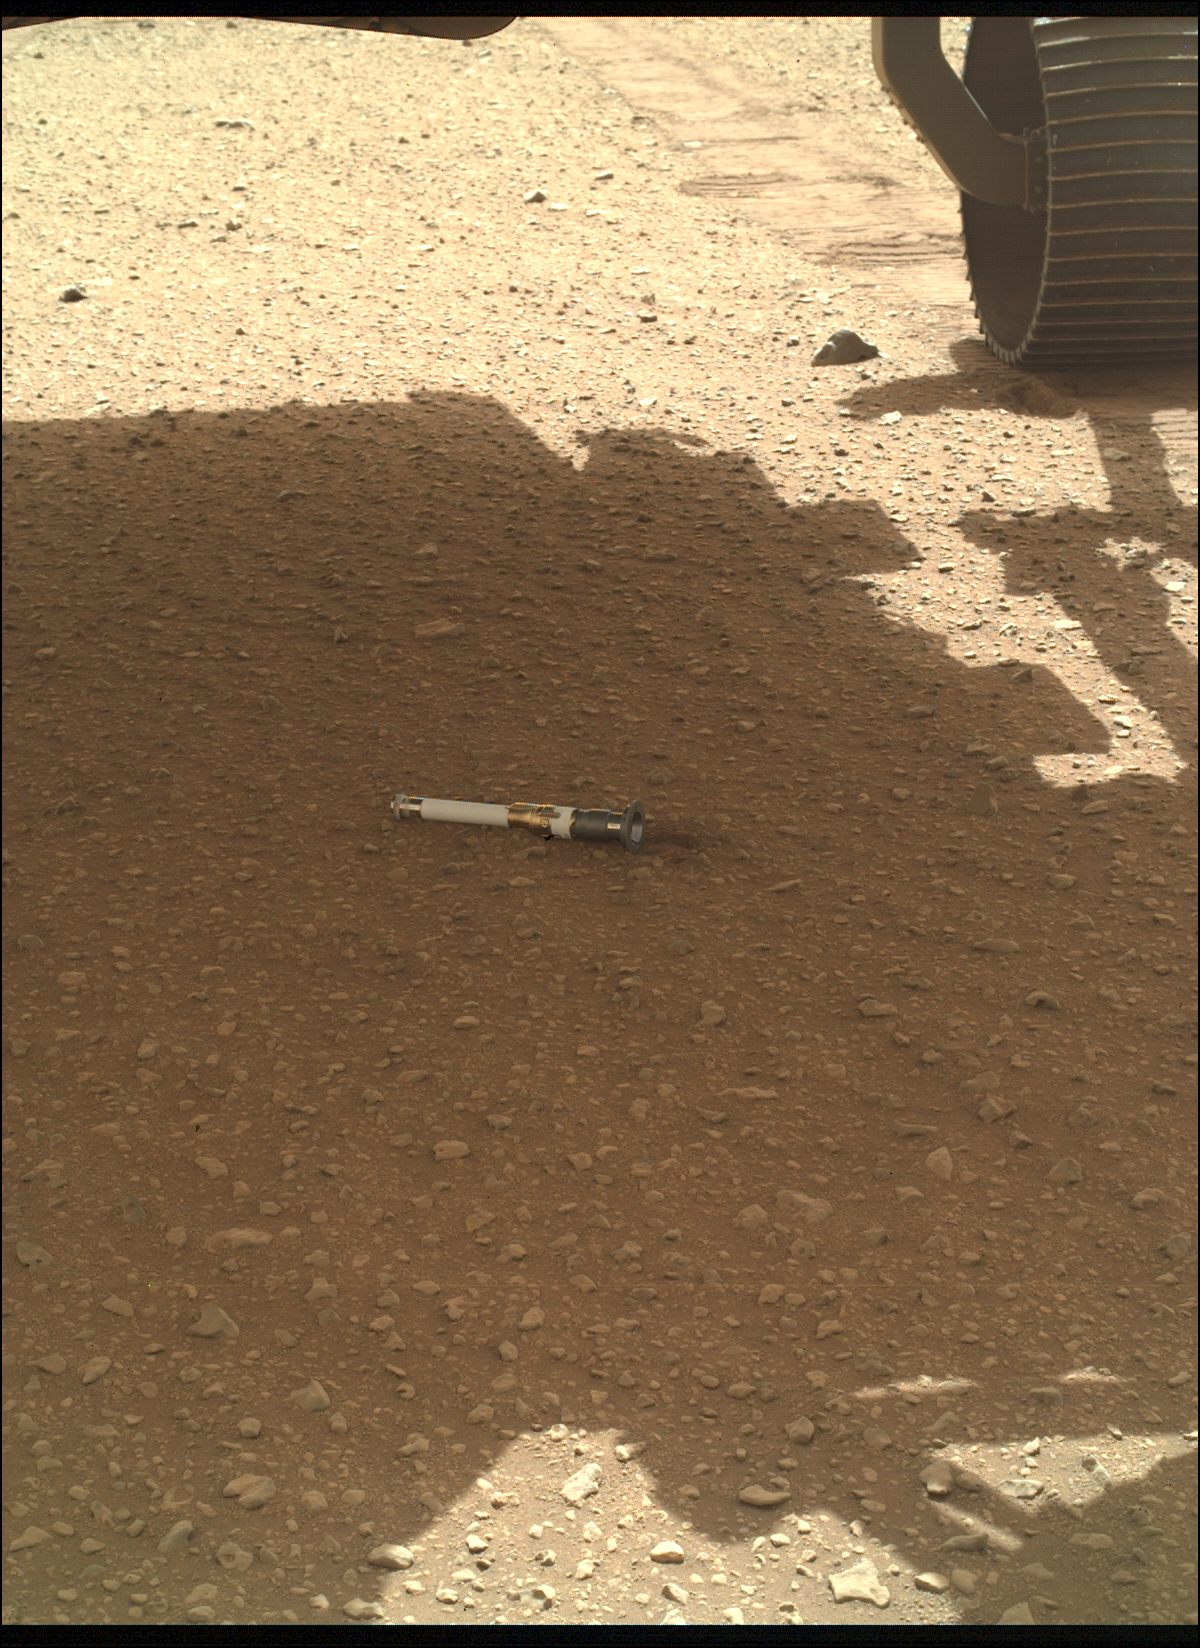 sands of mars with a tube on top. rover wheels are just in view